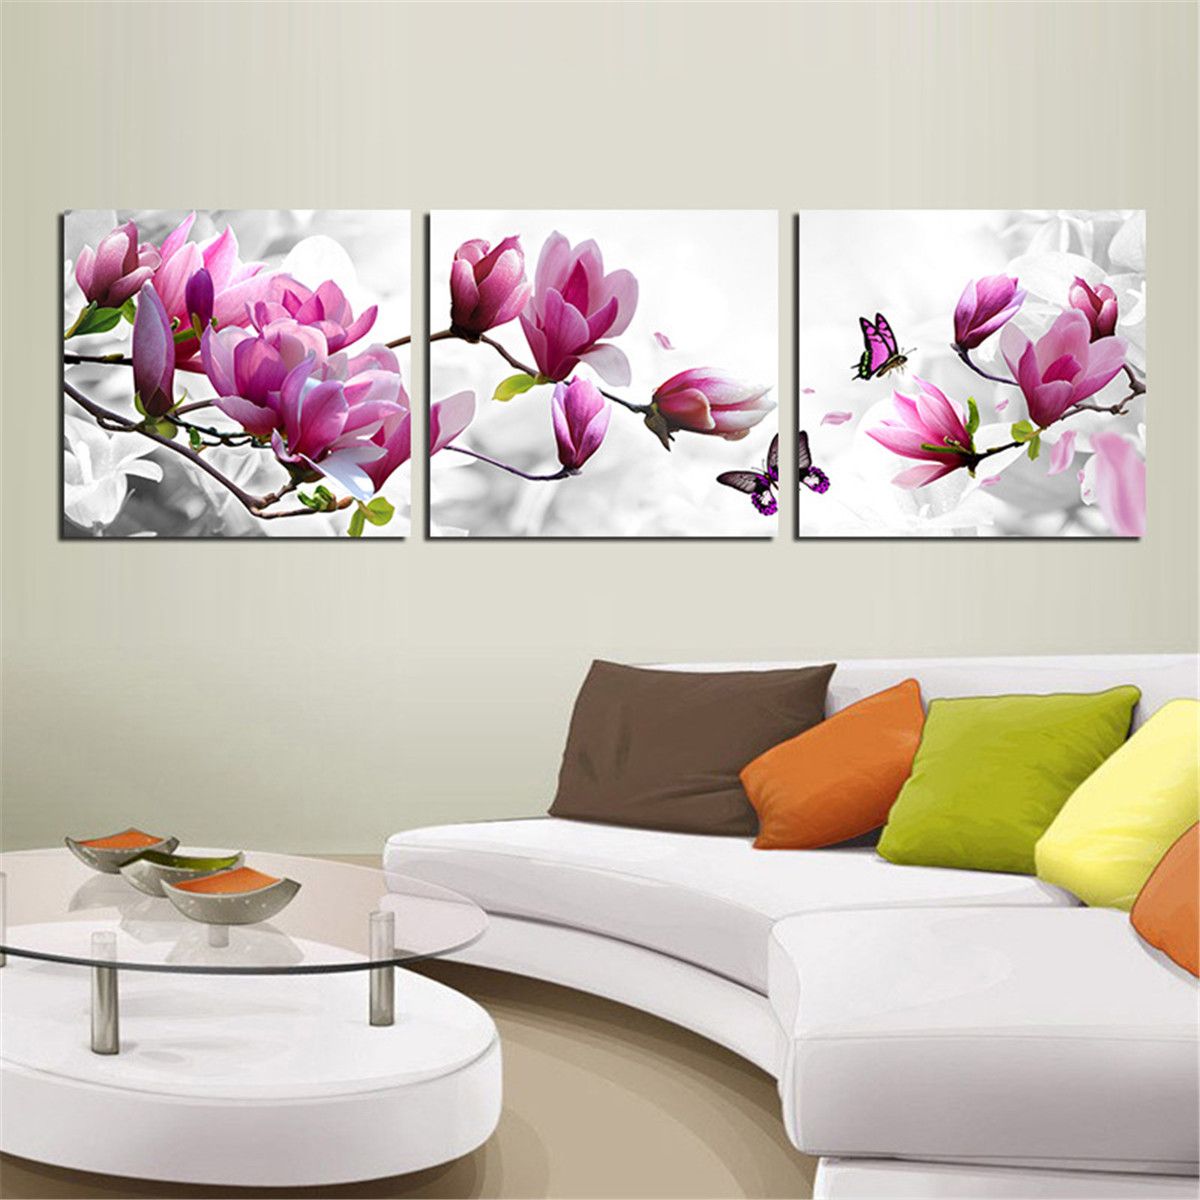 30x30cm-3Pcs-Panel-Framed-Flower-Canvas-Wall-Art-Home-Decor-Modern-Paintings-Print-Picture-1145217